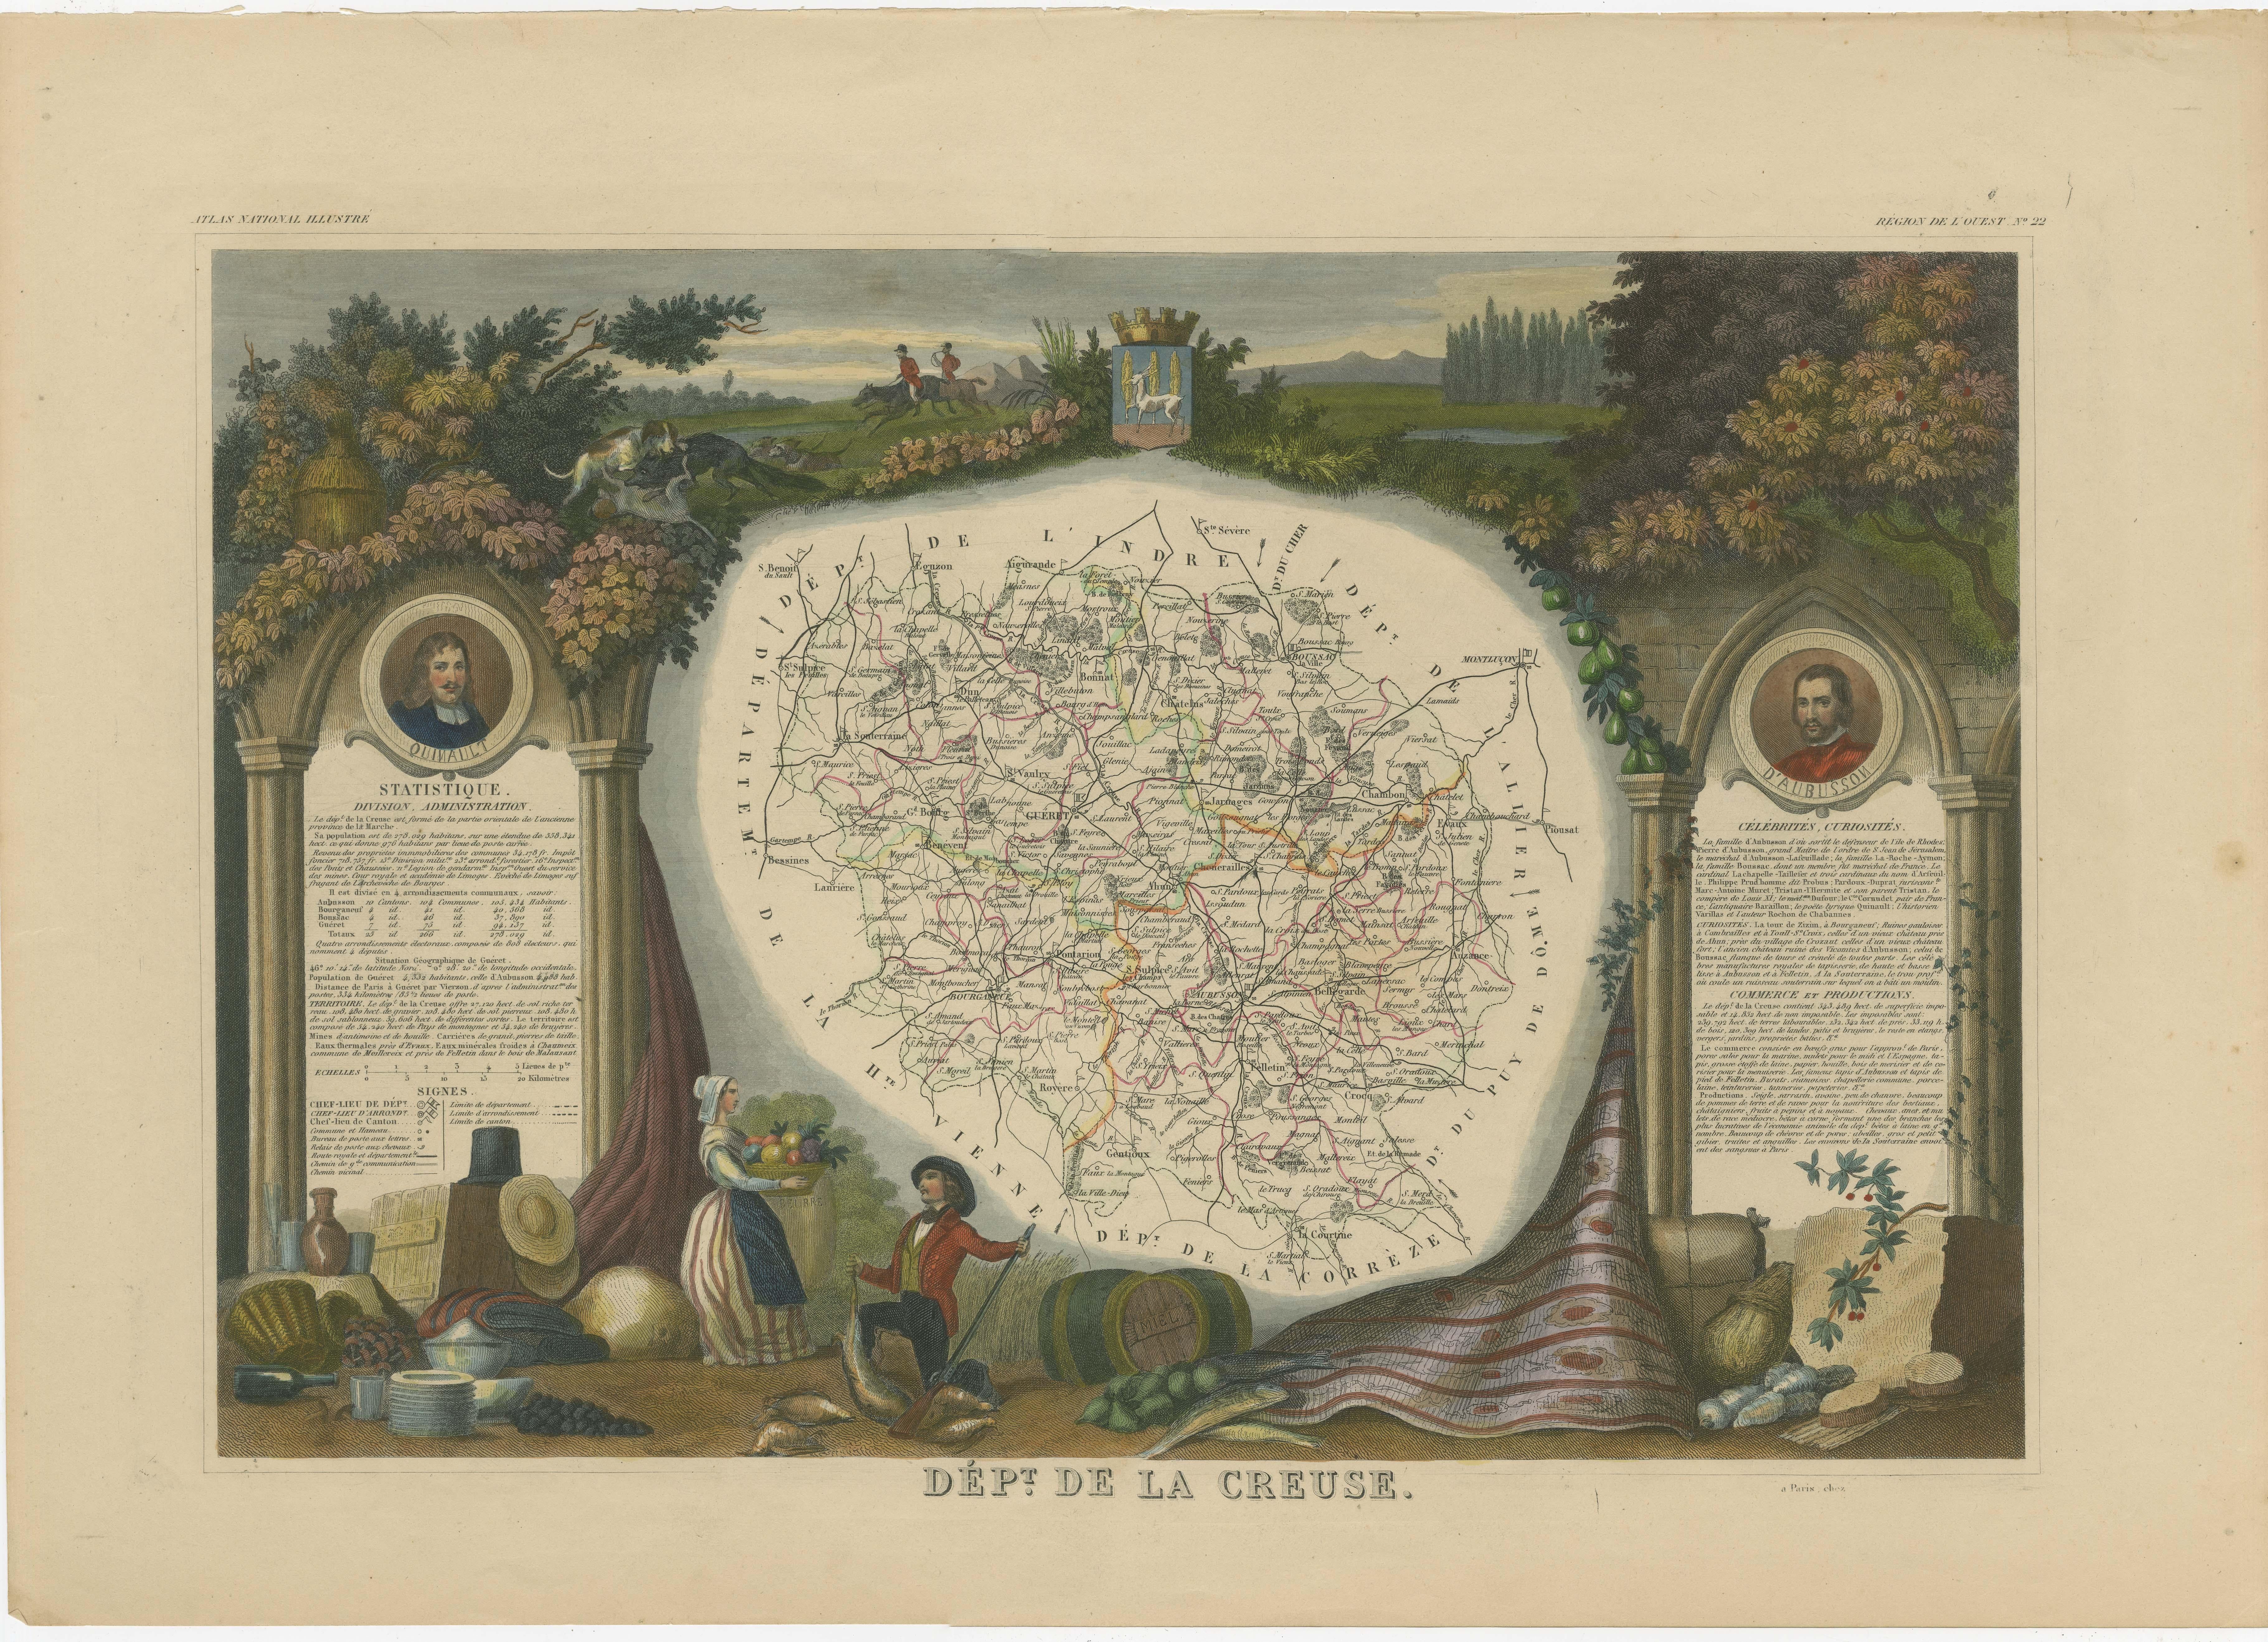 Antique map titled 'Dépt. de la Creuse'. Map of the French department of Creuse, France. This region is well known for its apple cider made from Limousin apples and its internationally renowned Limousine beef. The whole is surrounded by elaborate